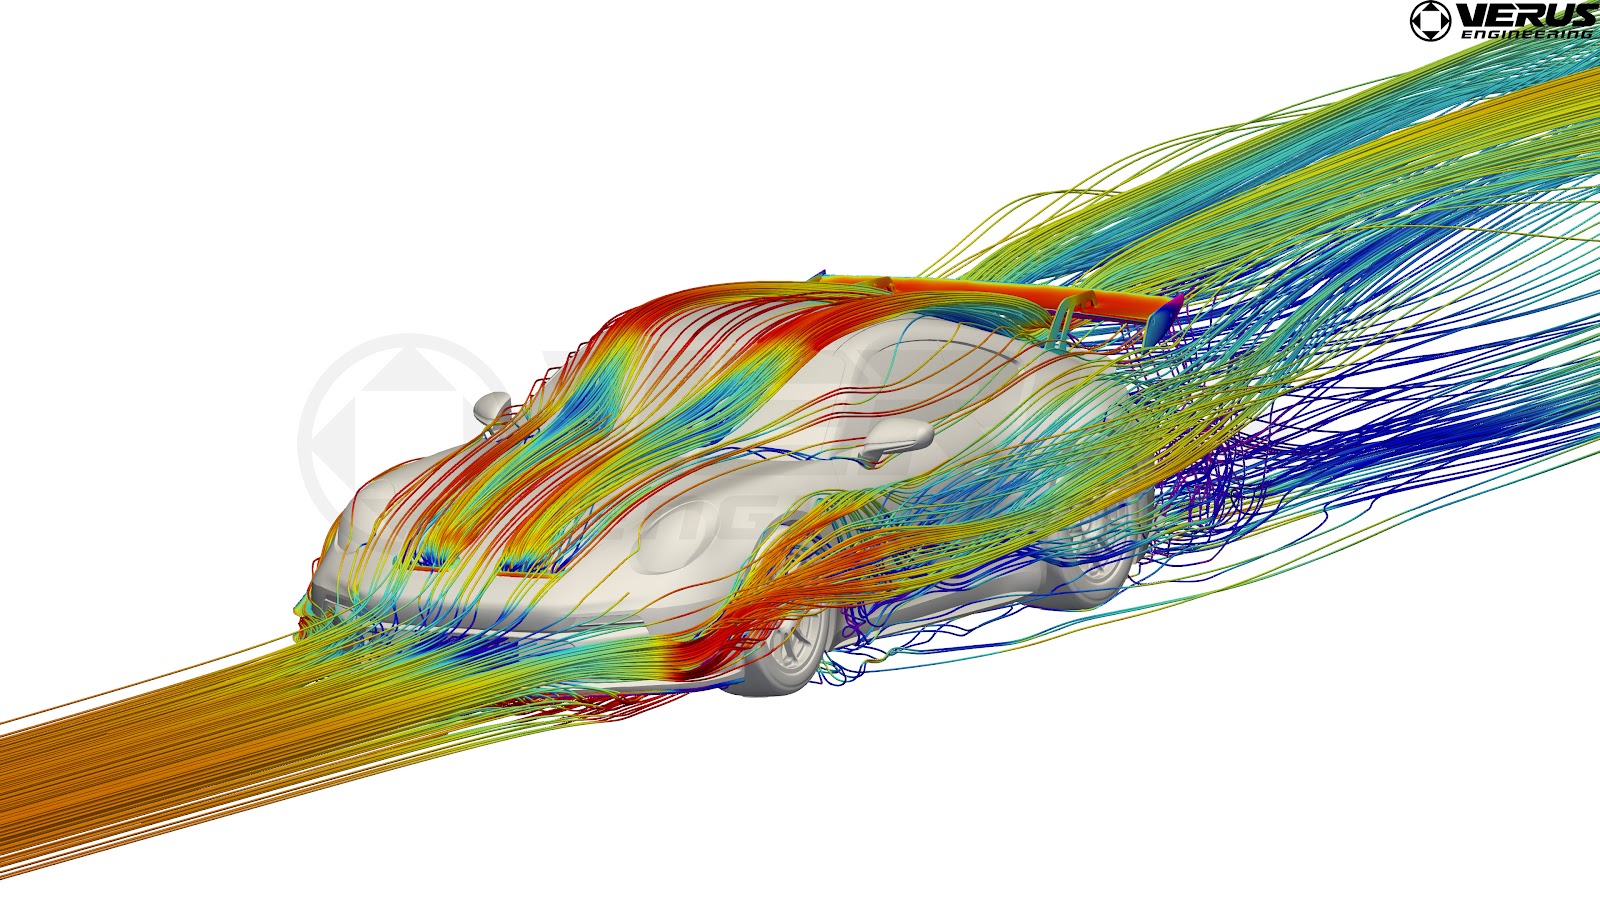 Computational fluid dynamics software showing how air flows over a vehicle